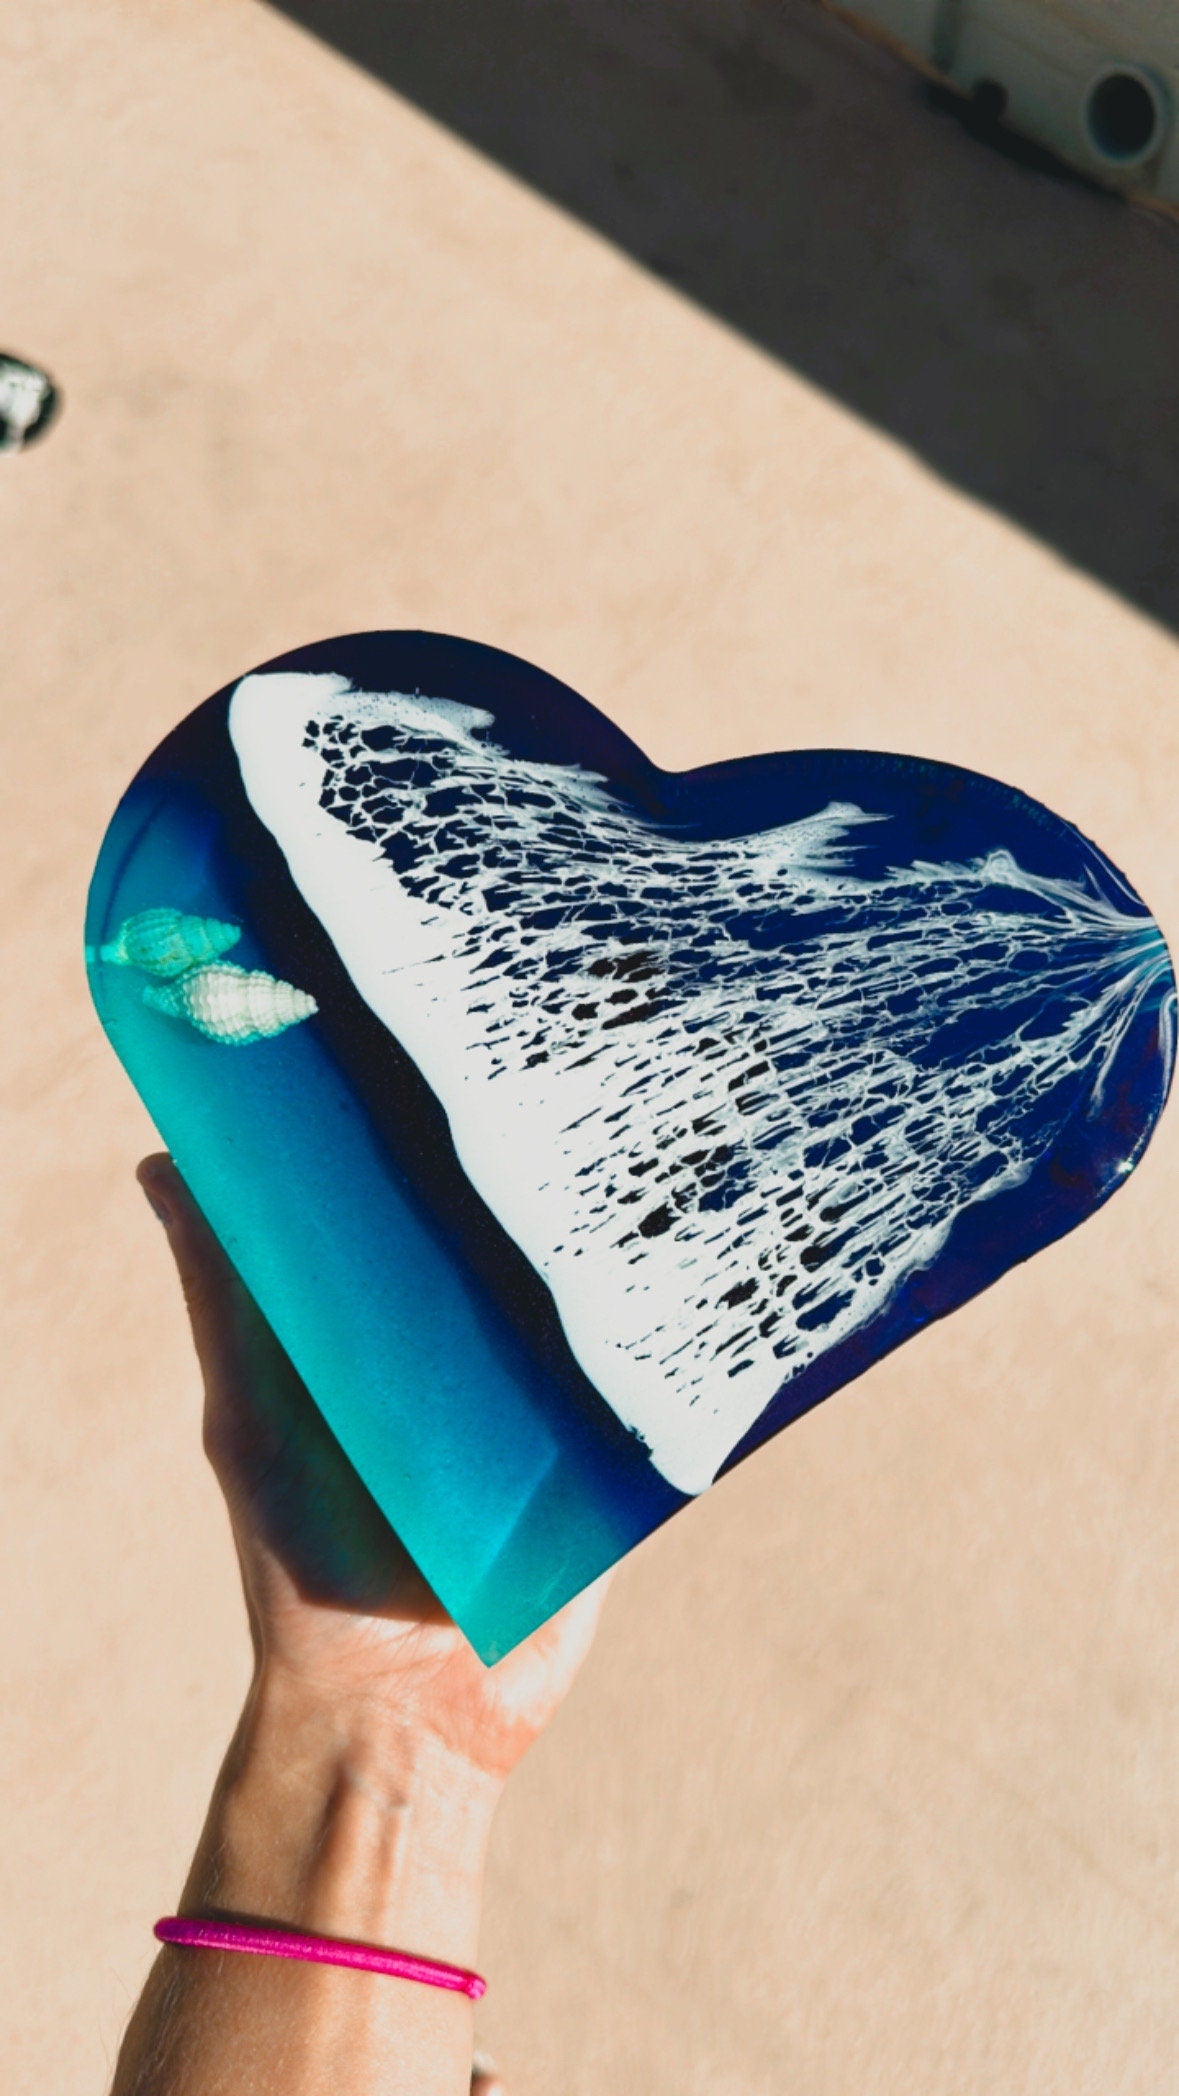 3d resin heart with waves and real sand and seashells ~ beach bookshelf decor